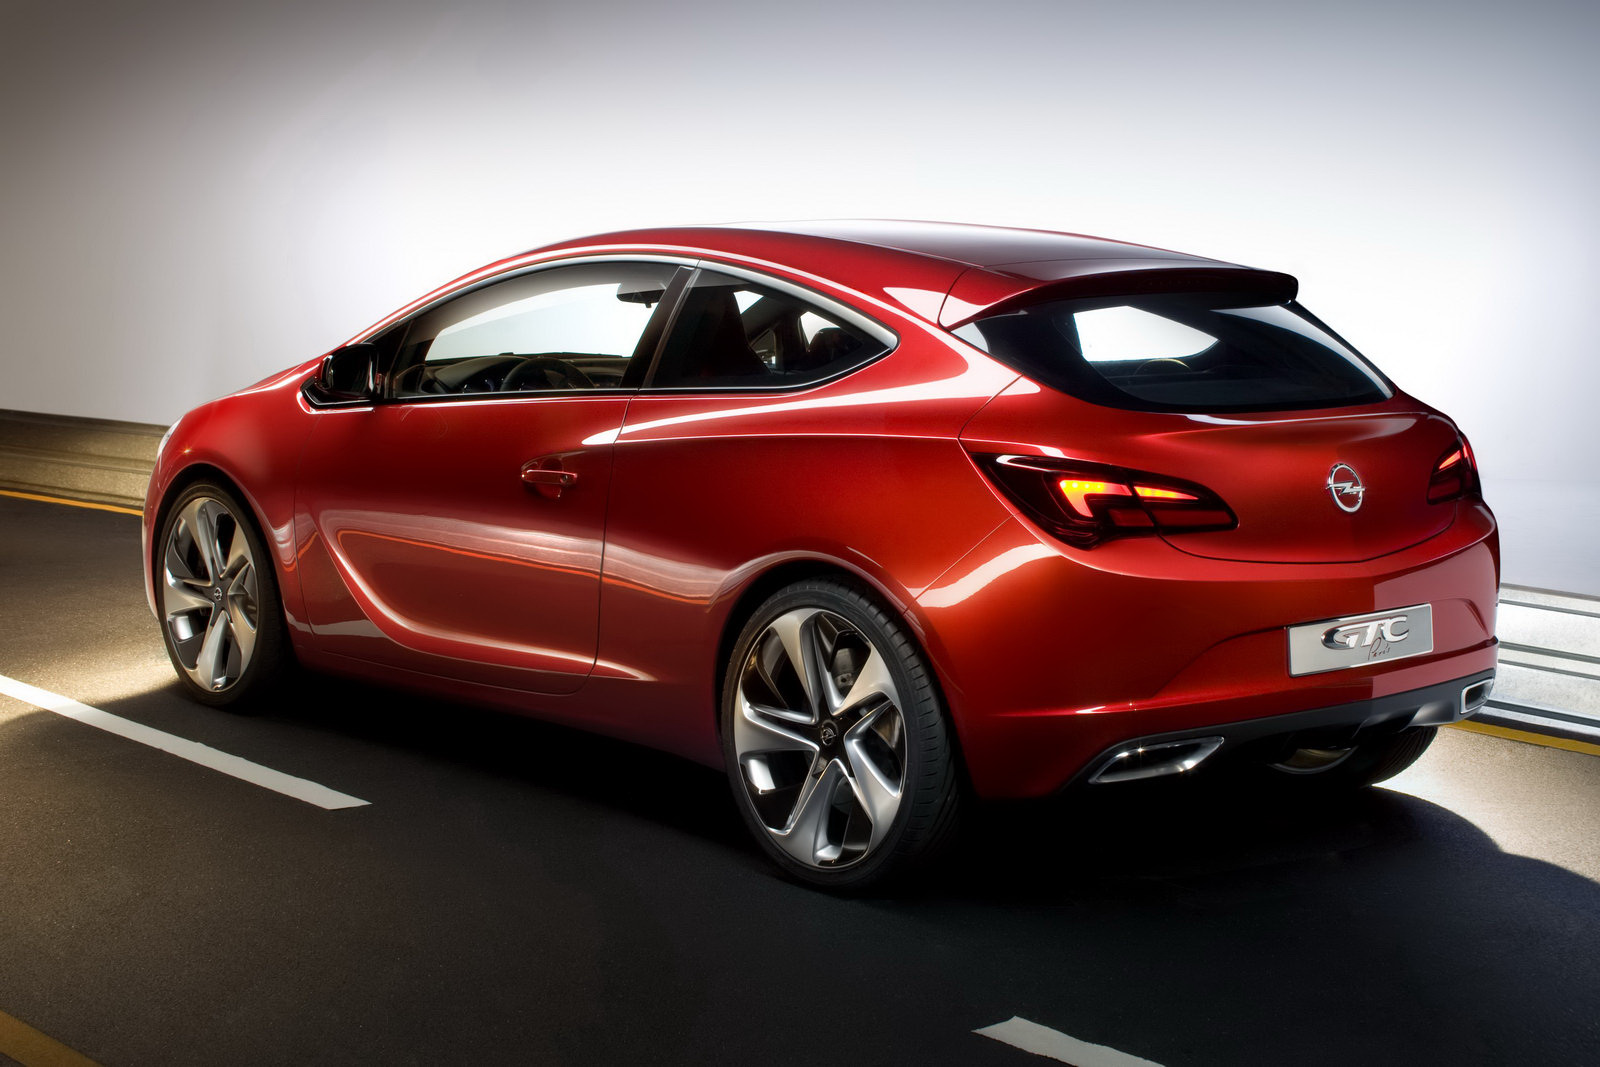 The latest news on the launch of Opel Astra Sports Hatch is